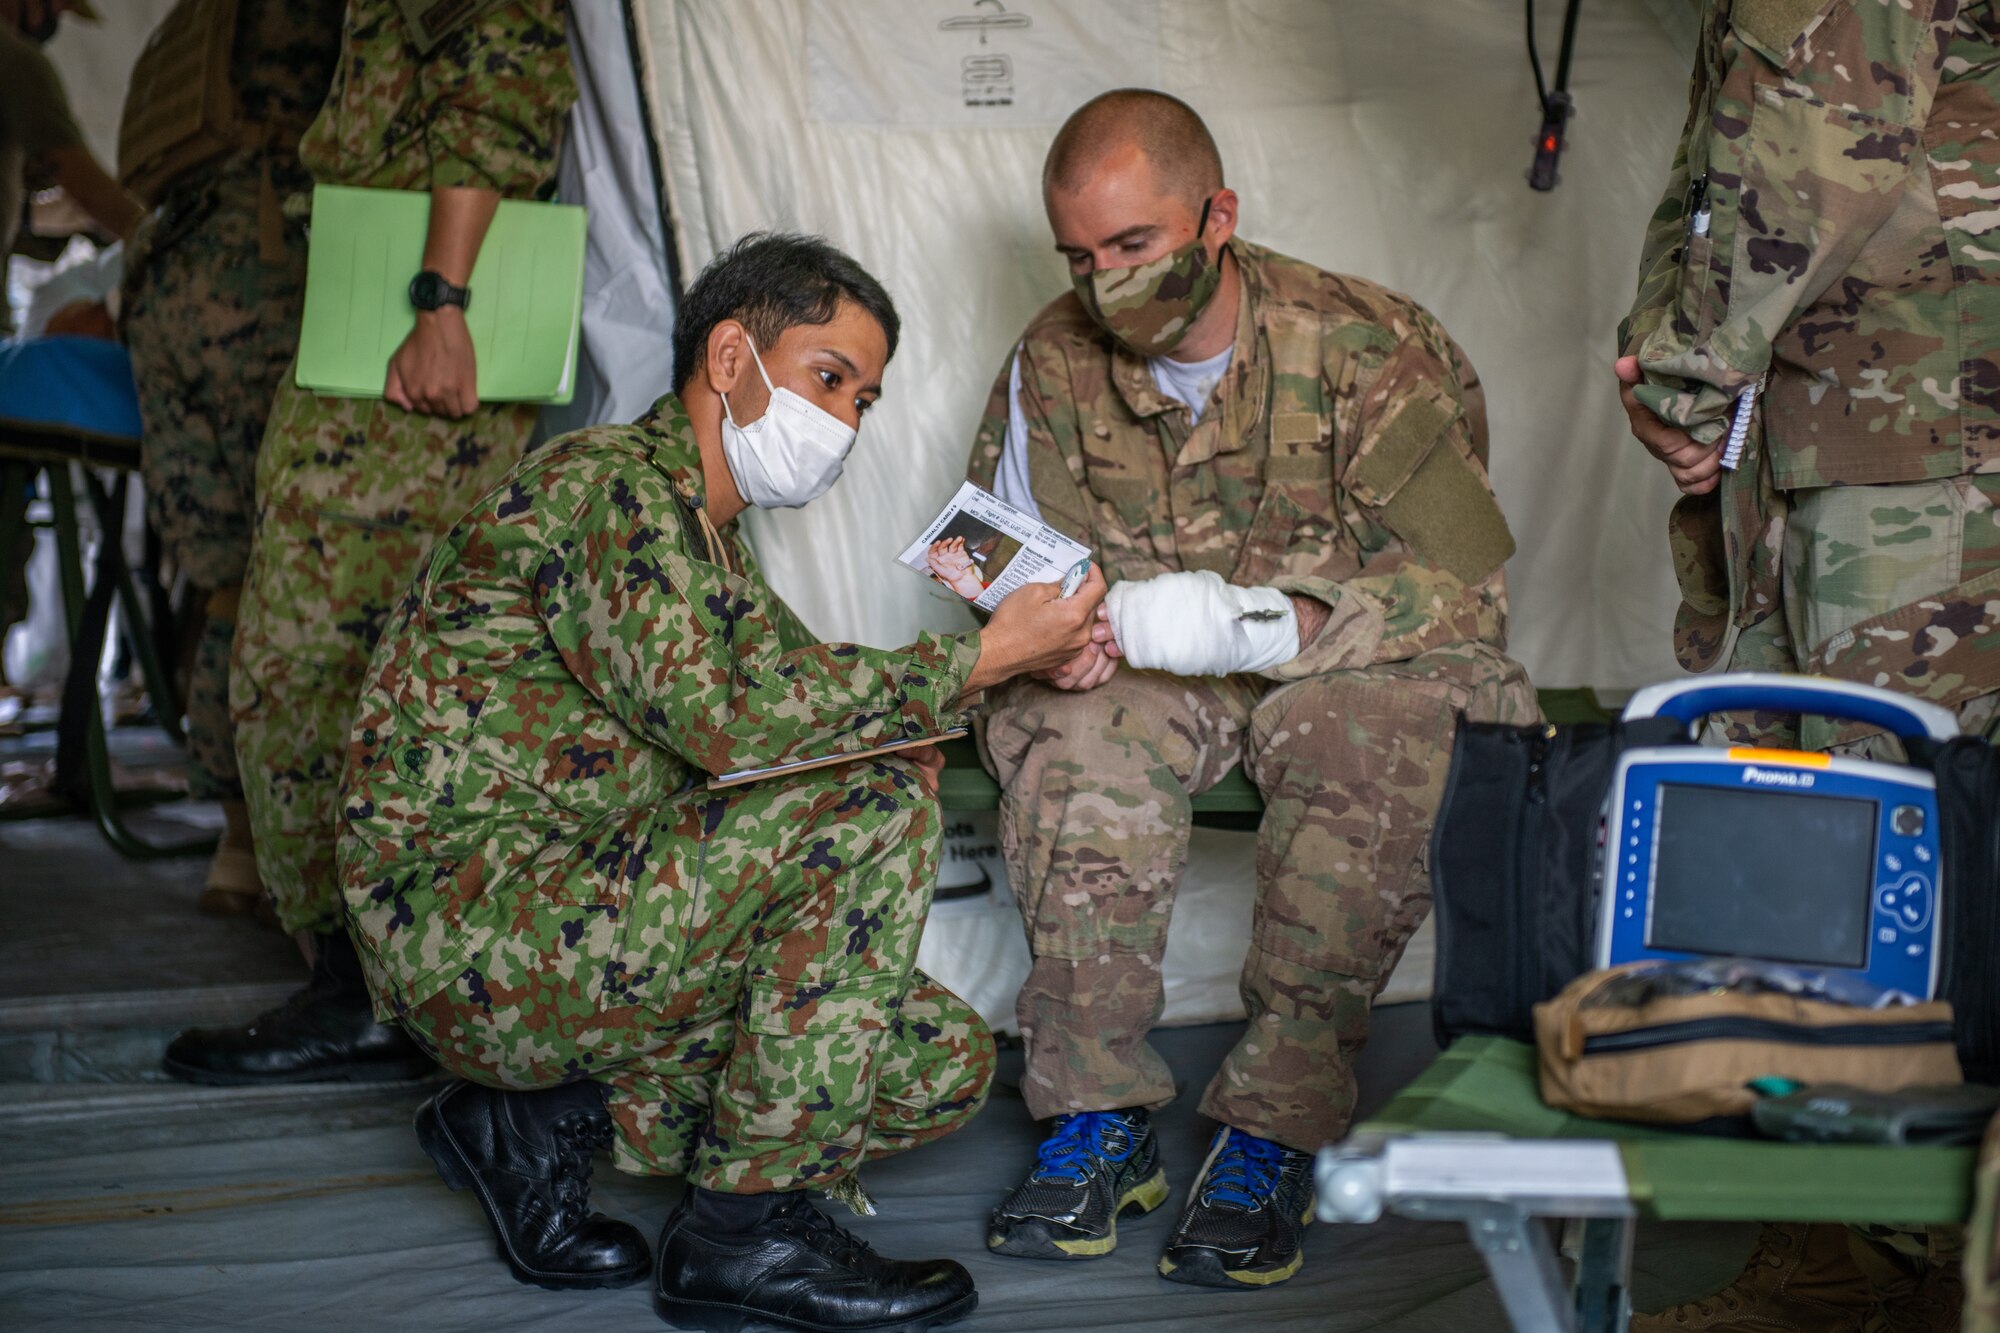 A Japanese military personnel attends to a U.S. Air Force member roleplaying a patient